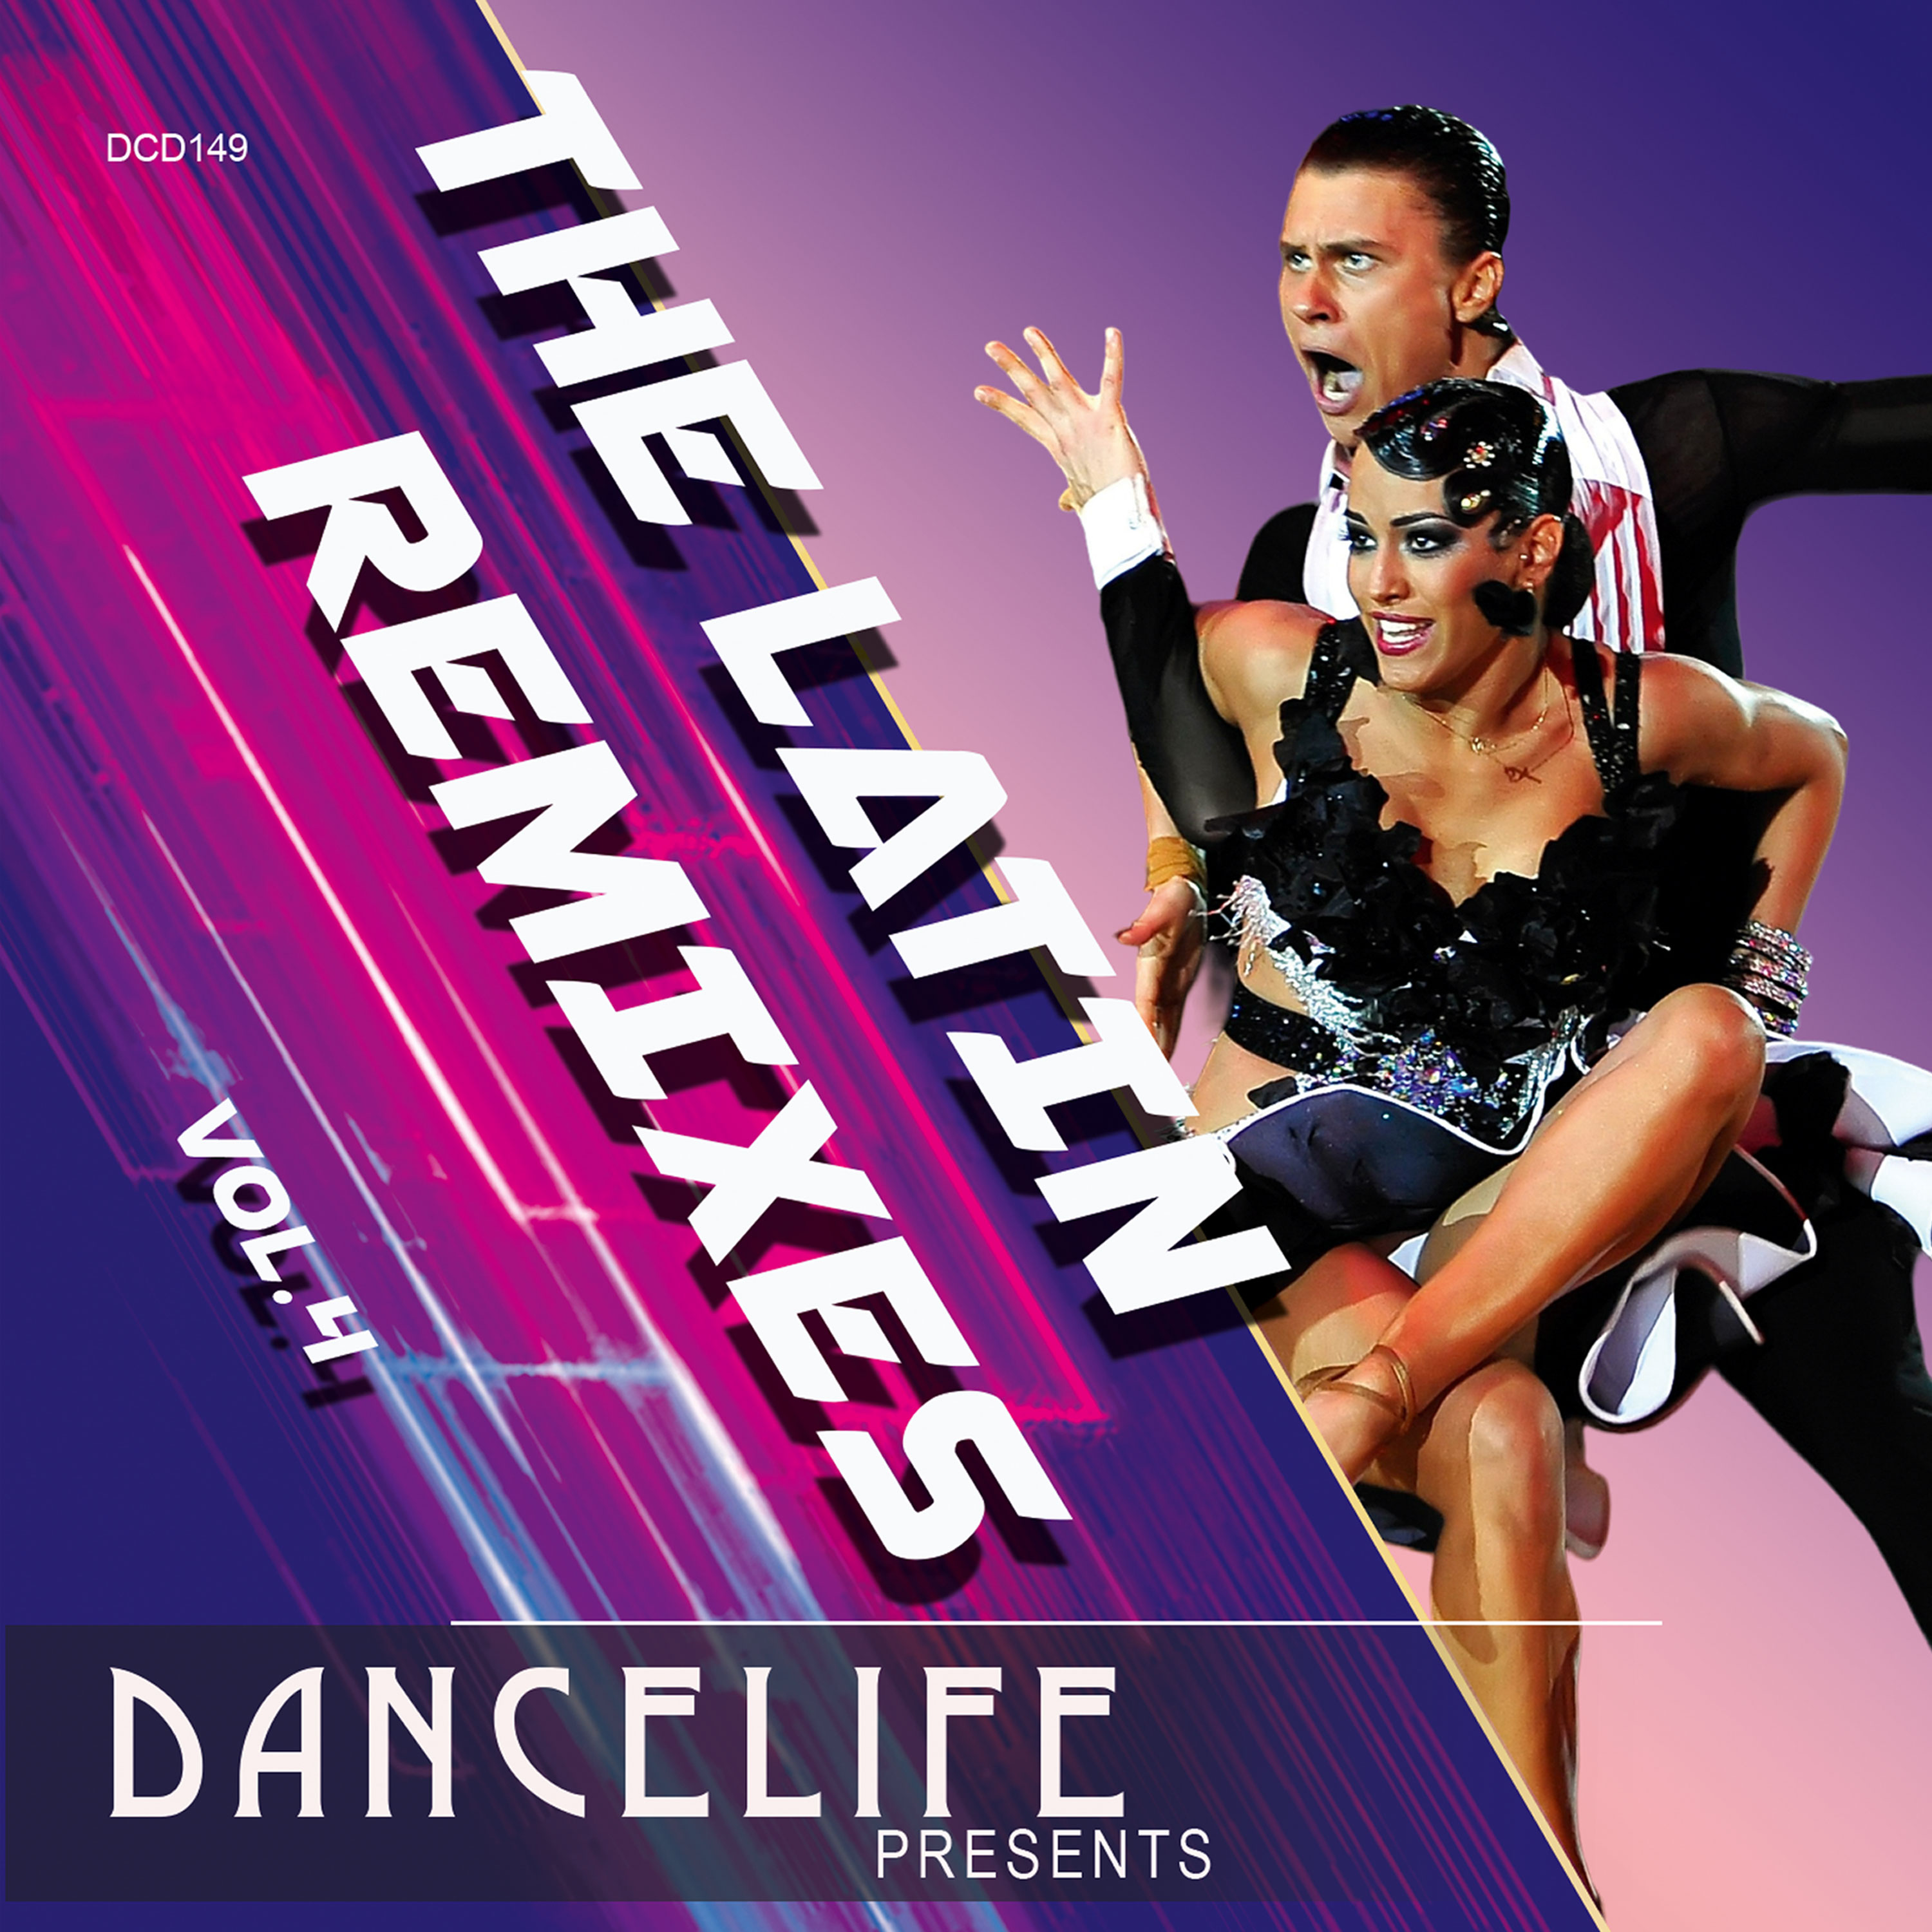 CD Cover - Dancelife DJ's Presents: Movies and Musicals vol. 3